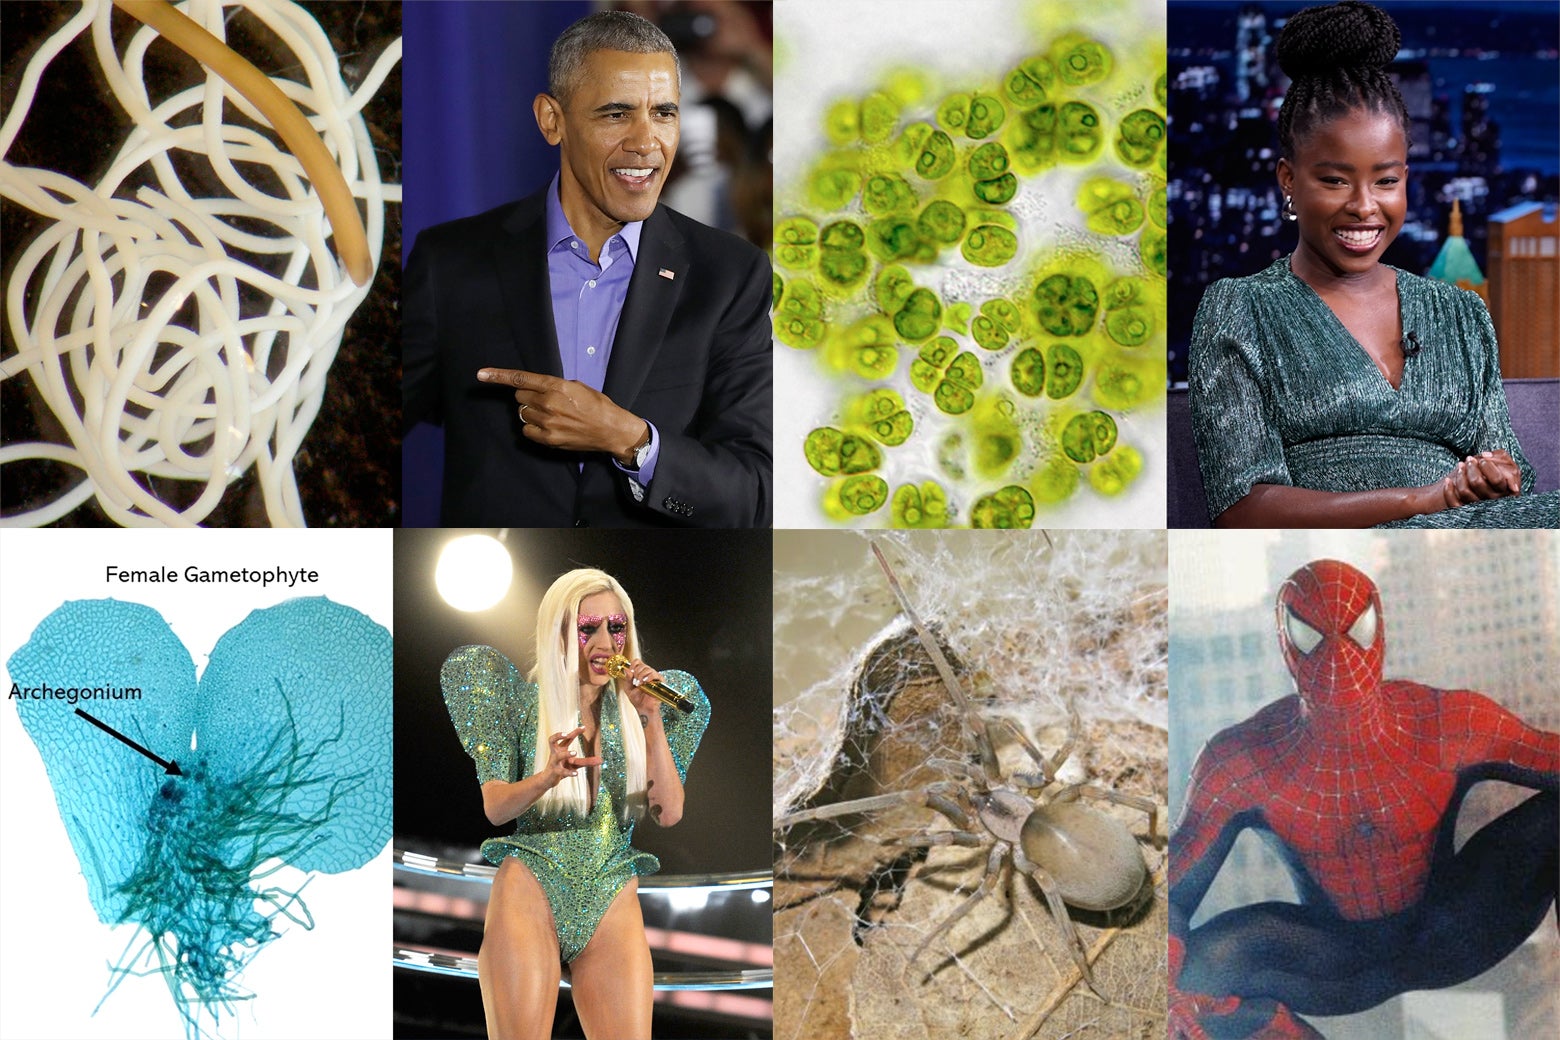 Side by side comparisons of organisms and celebrities for which they're named after:
A picture of a hairworm next to a picture of Barack Obama
A picture of algae under a microscope next to a picture of Amanda Gorman
A picture of a fern gametophyte next to a picture of Lady Gaga in a fern-inspired dress
A picture of a spider next to a picture of Spider-Man